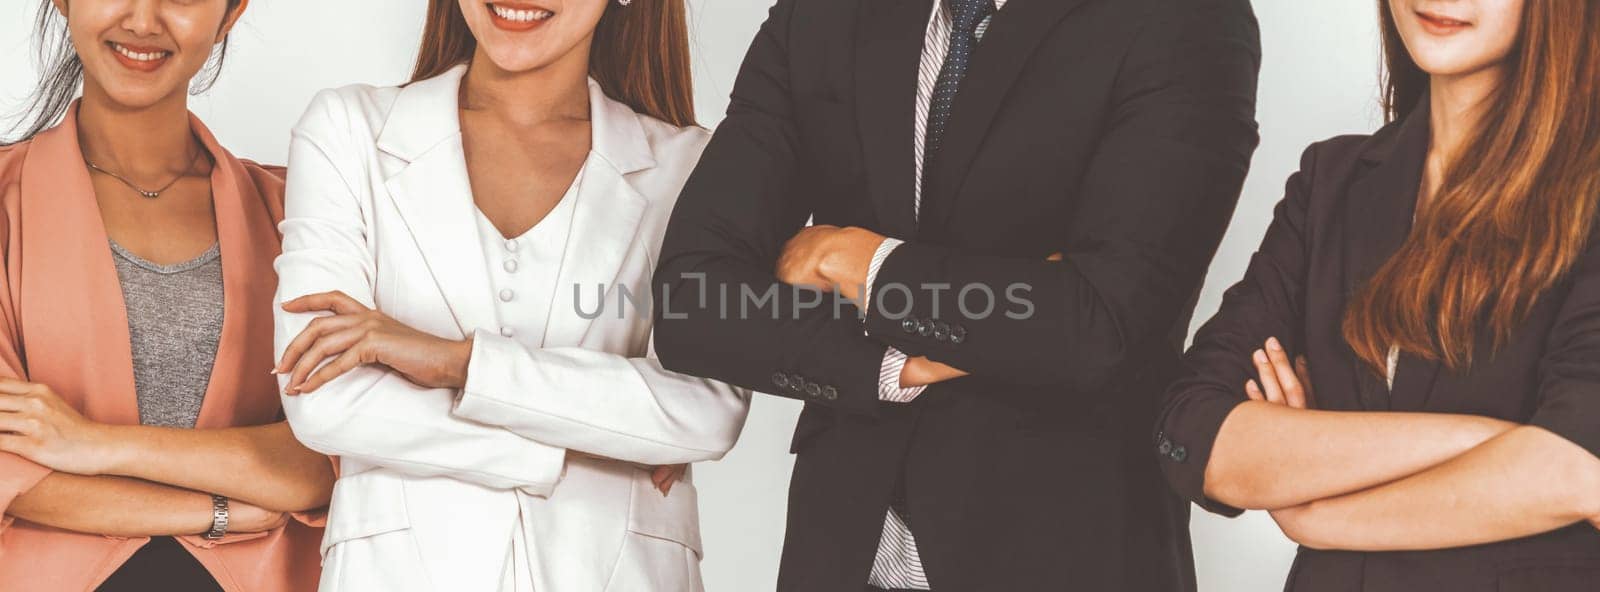 Businesswomen and businessman standing in row in office. Corporate business and teamwork concept. uds